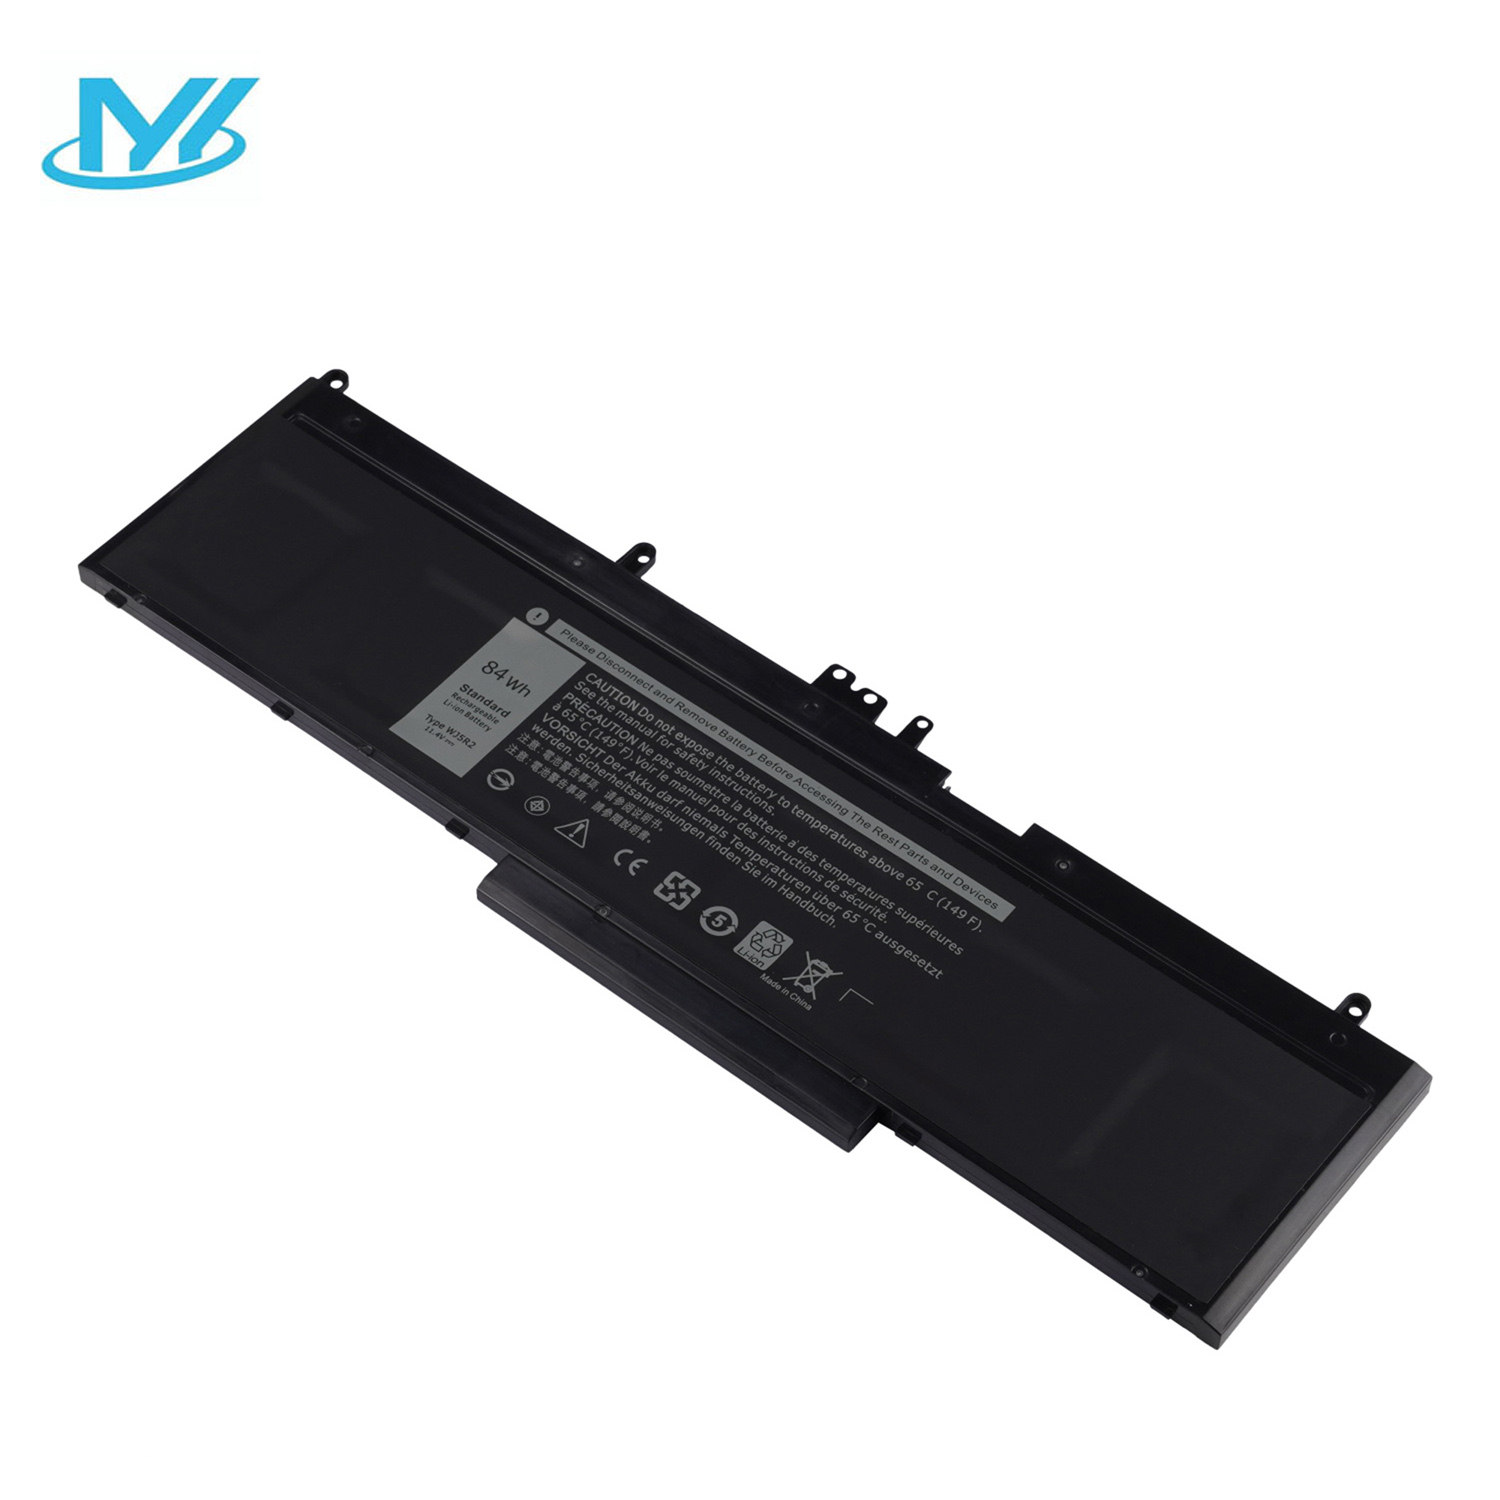 WJ5R2 rechargeable lithium ion Notebook battery Laptop battery WJ5R2 4F5YV 11.4V 84Wh for Dell laptop Latitude E5250 5250 5450 5550 5570 Precision M3510 3510